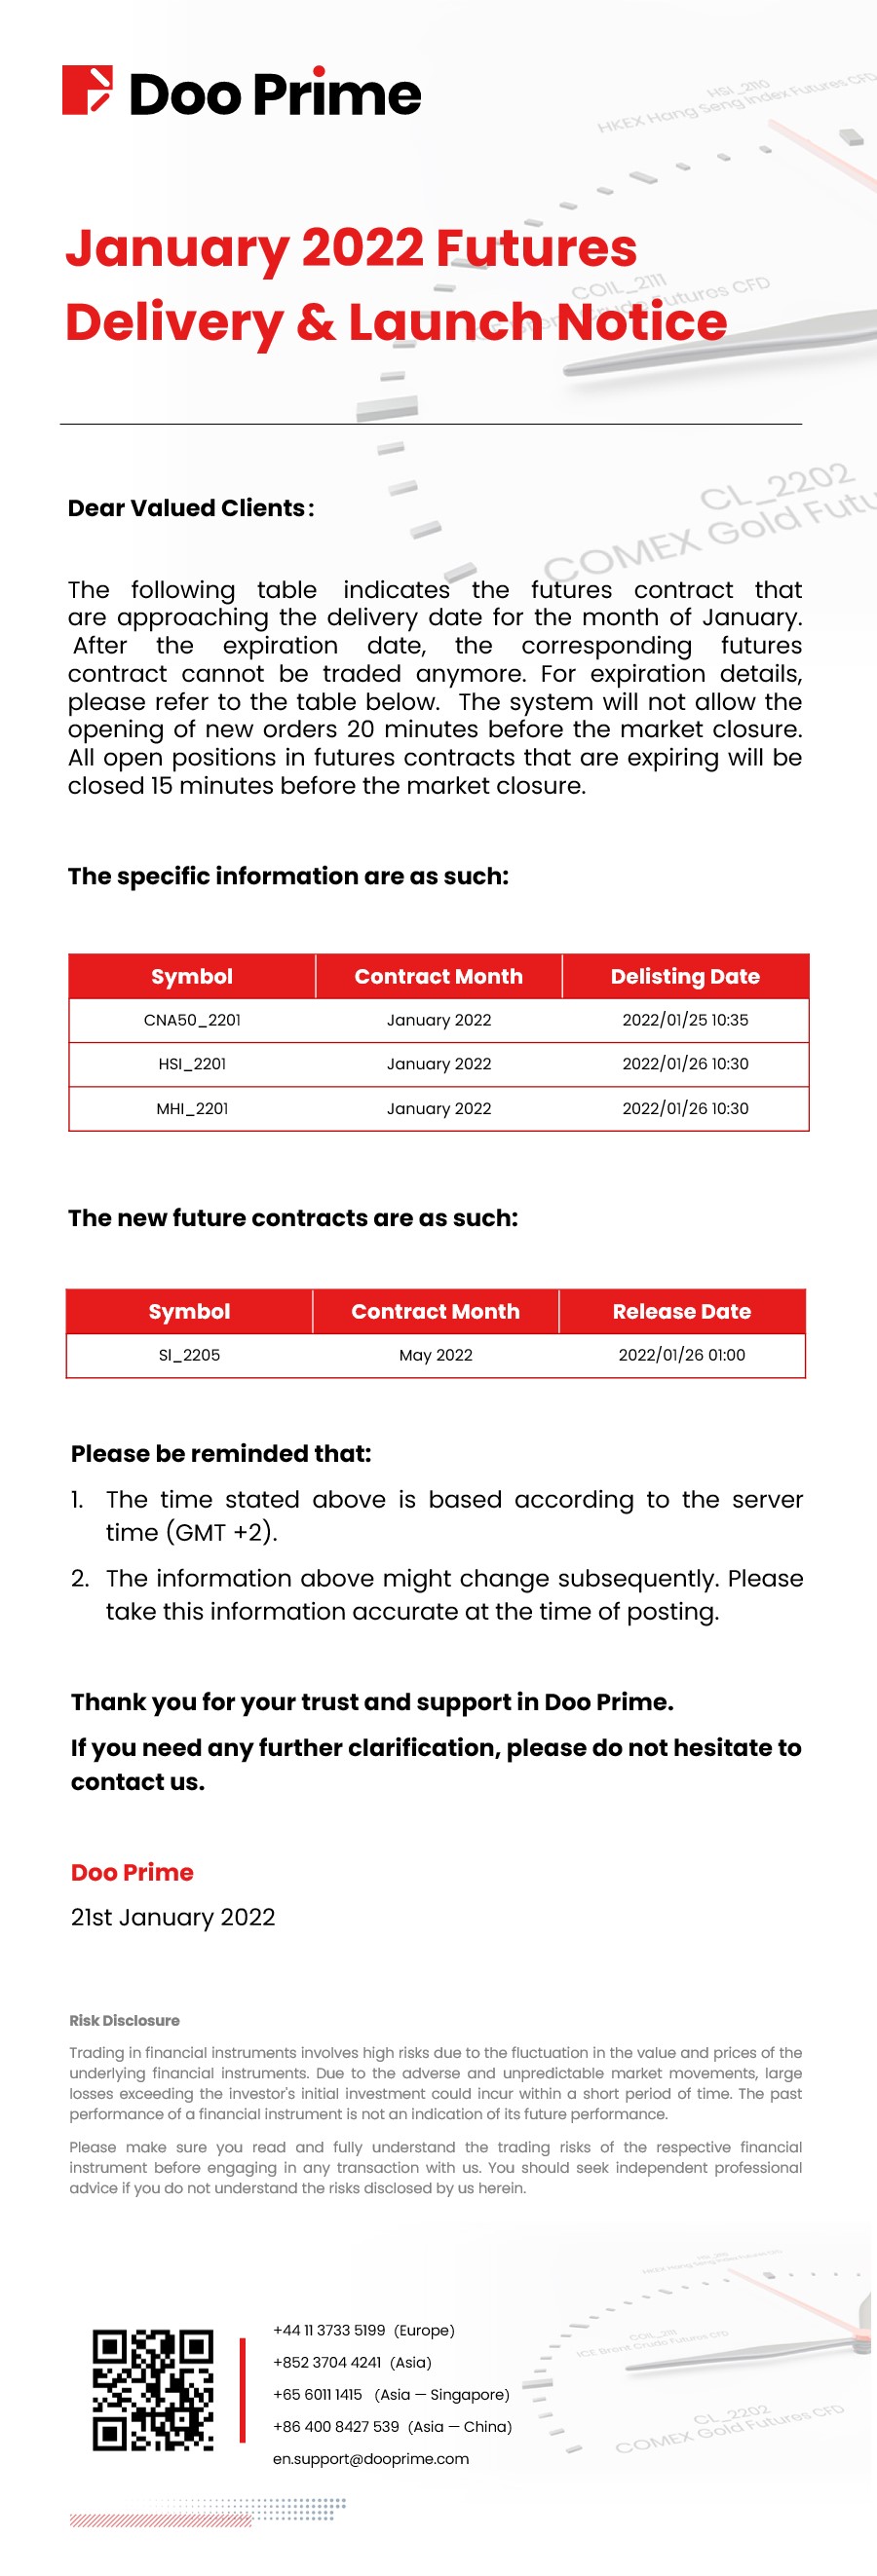 Doo Prime January 2022 Futures Delivery & Launch Notice